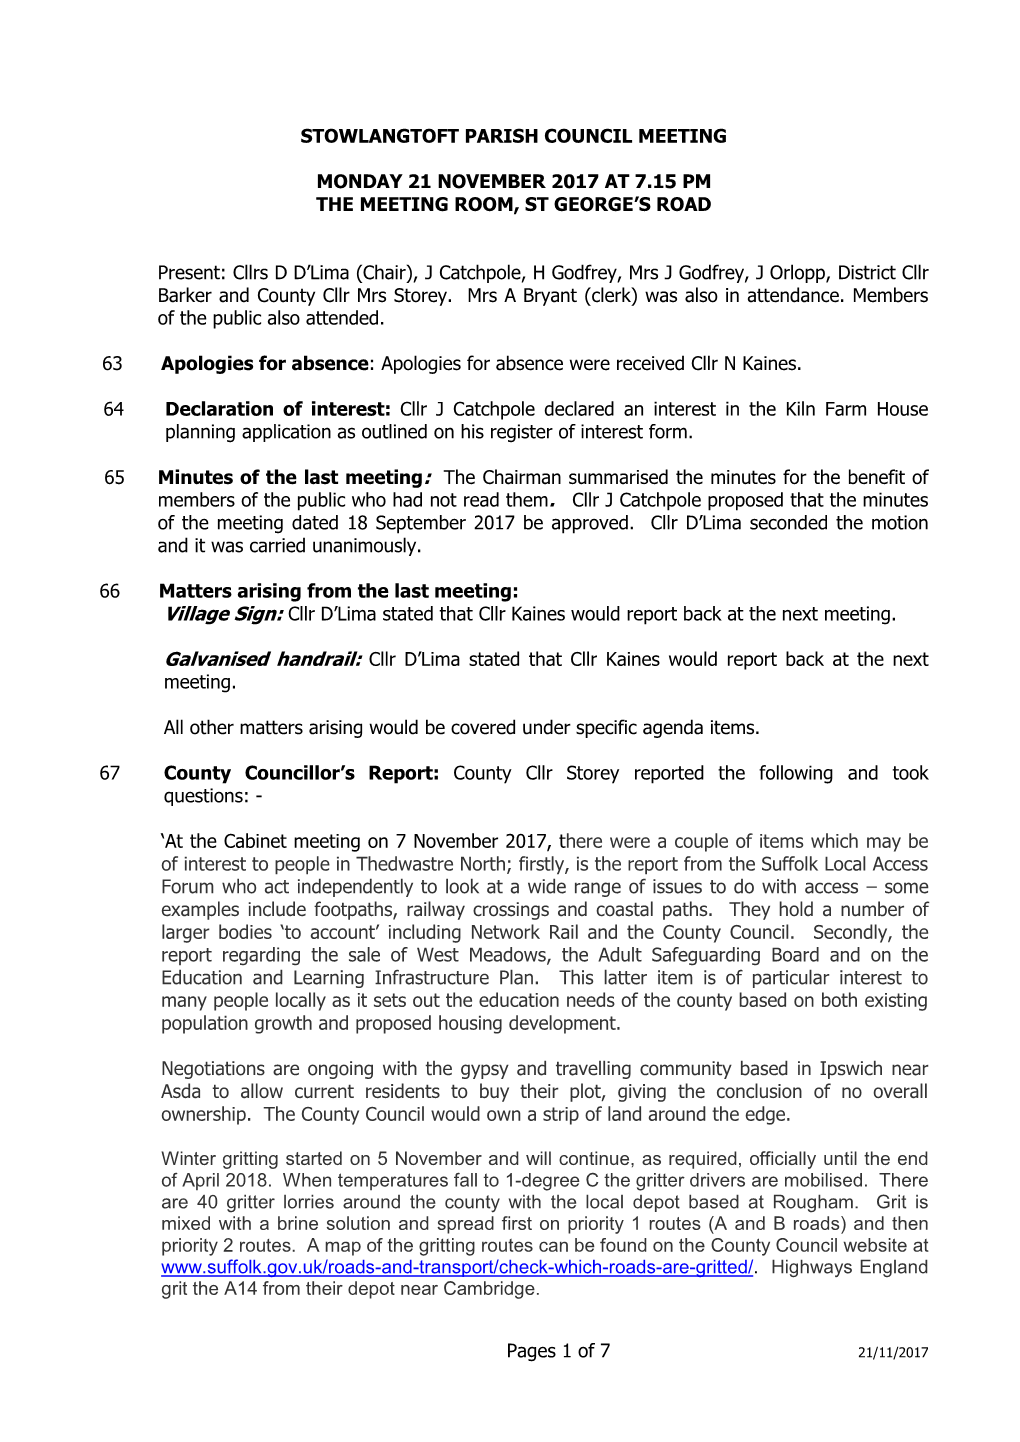 Pages 1 of 7 STOWLANGTOFT PARISH COUNCIL MEETING MONDAY 21 NOVEMBER 2017 at 7.15 PM the MEETING ROOM, ST GEORGE's ROAD Present